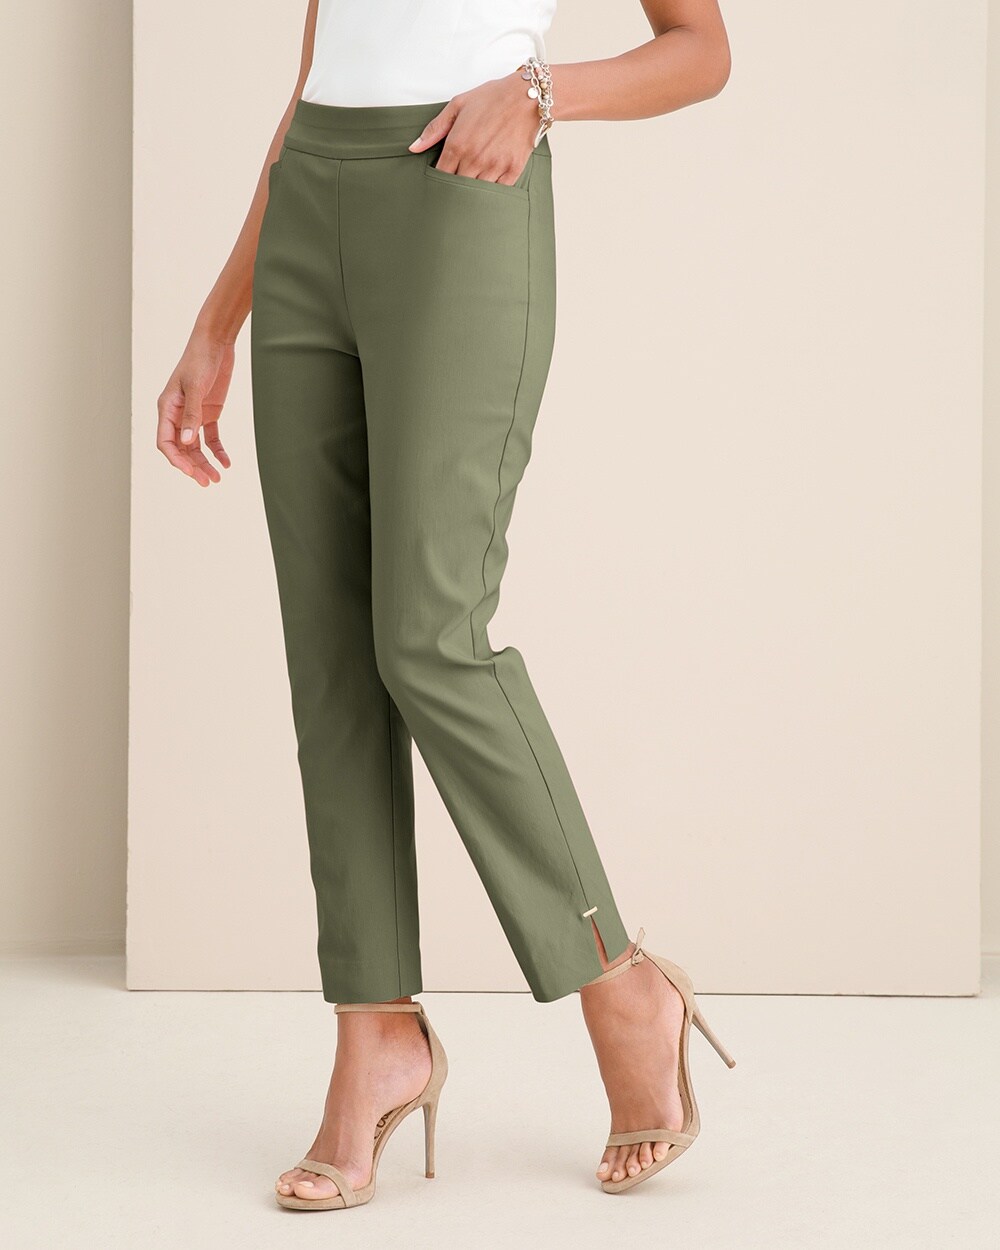 So Slimming Brigitte Slim Ankle Pants video preview image, click to start video